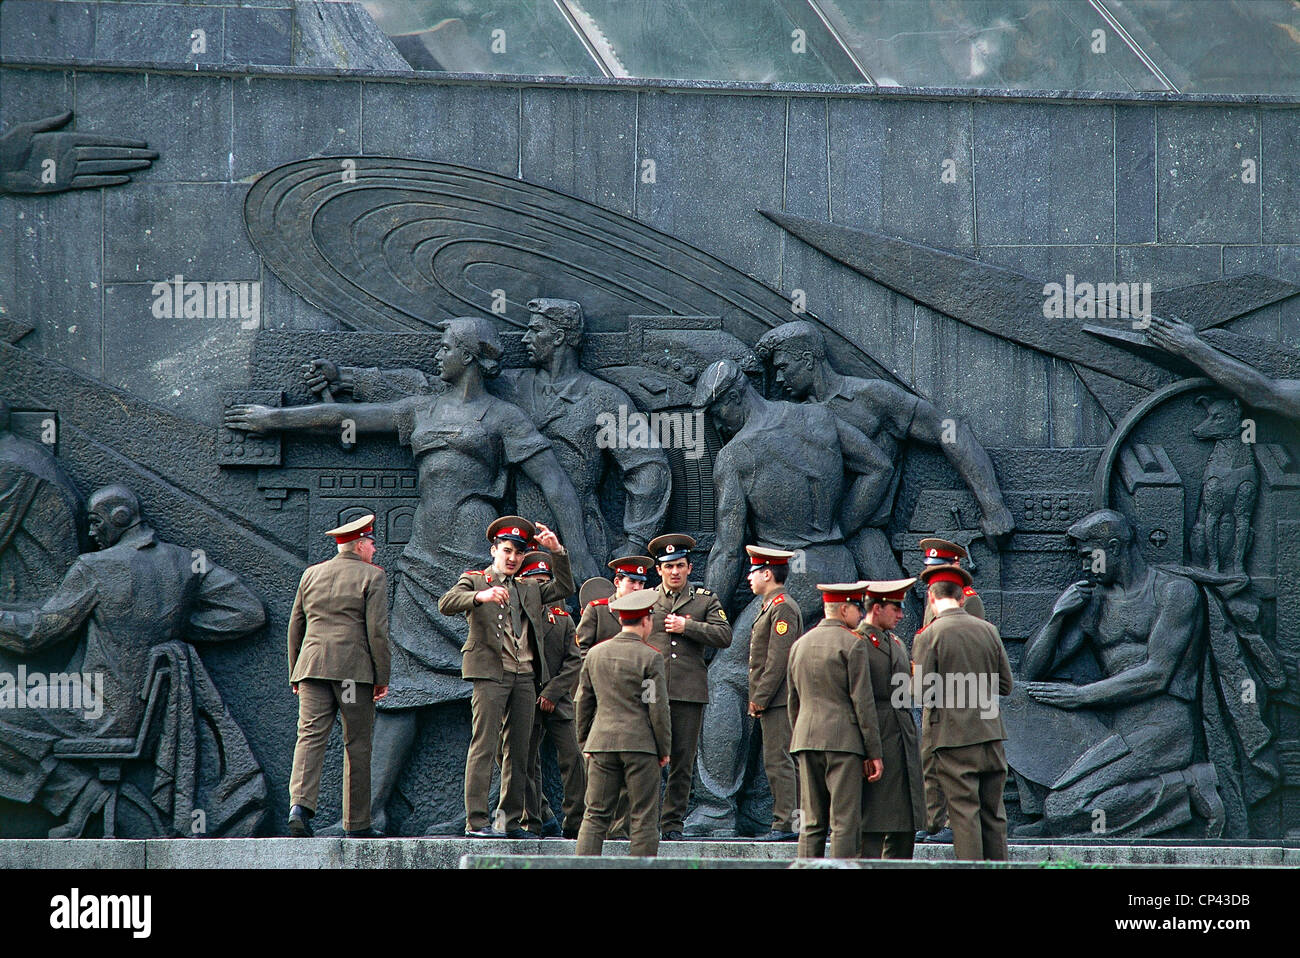 Russia XX century. Eighties - Soldiers of the Red Army in front of a monument-style real-socialist Stock Photo